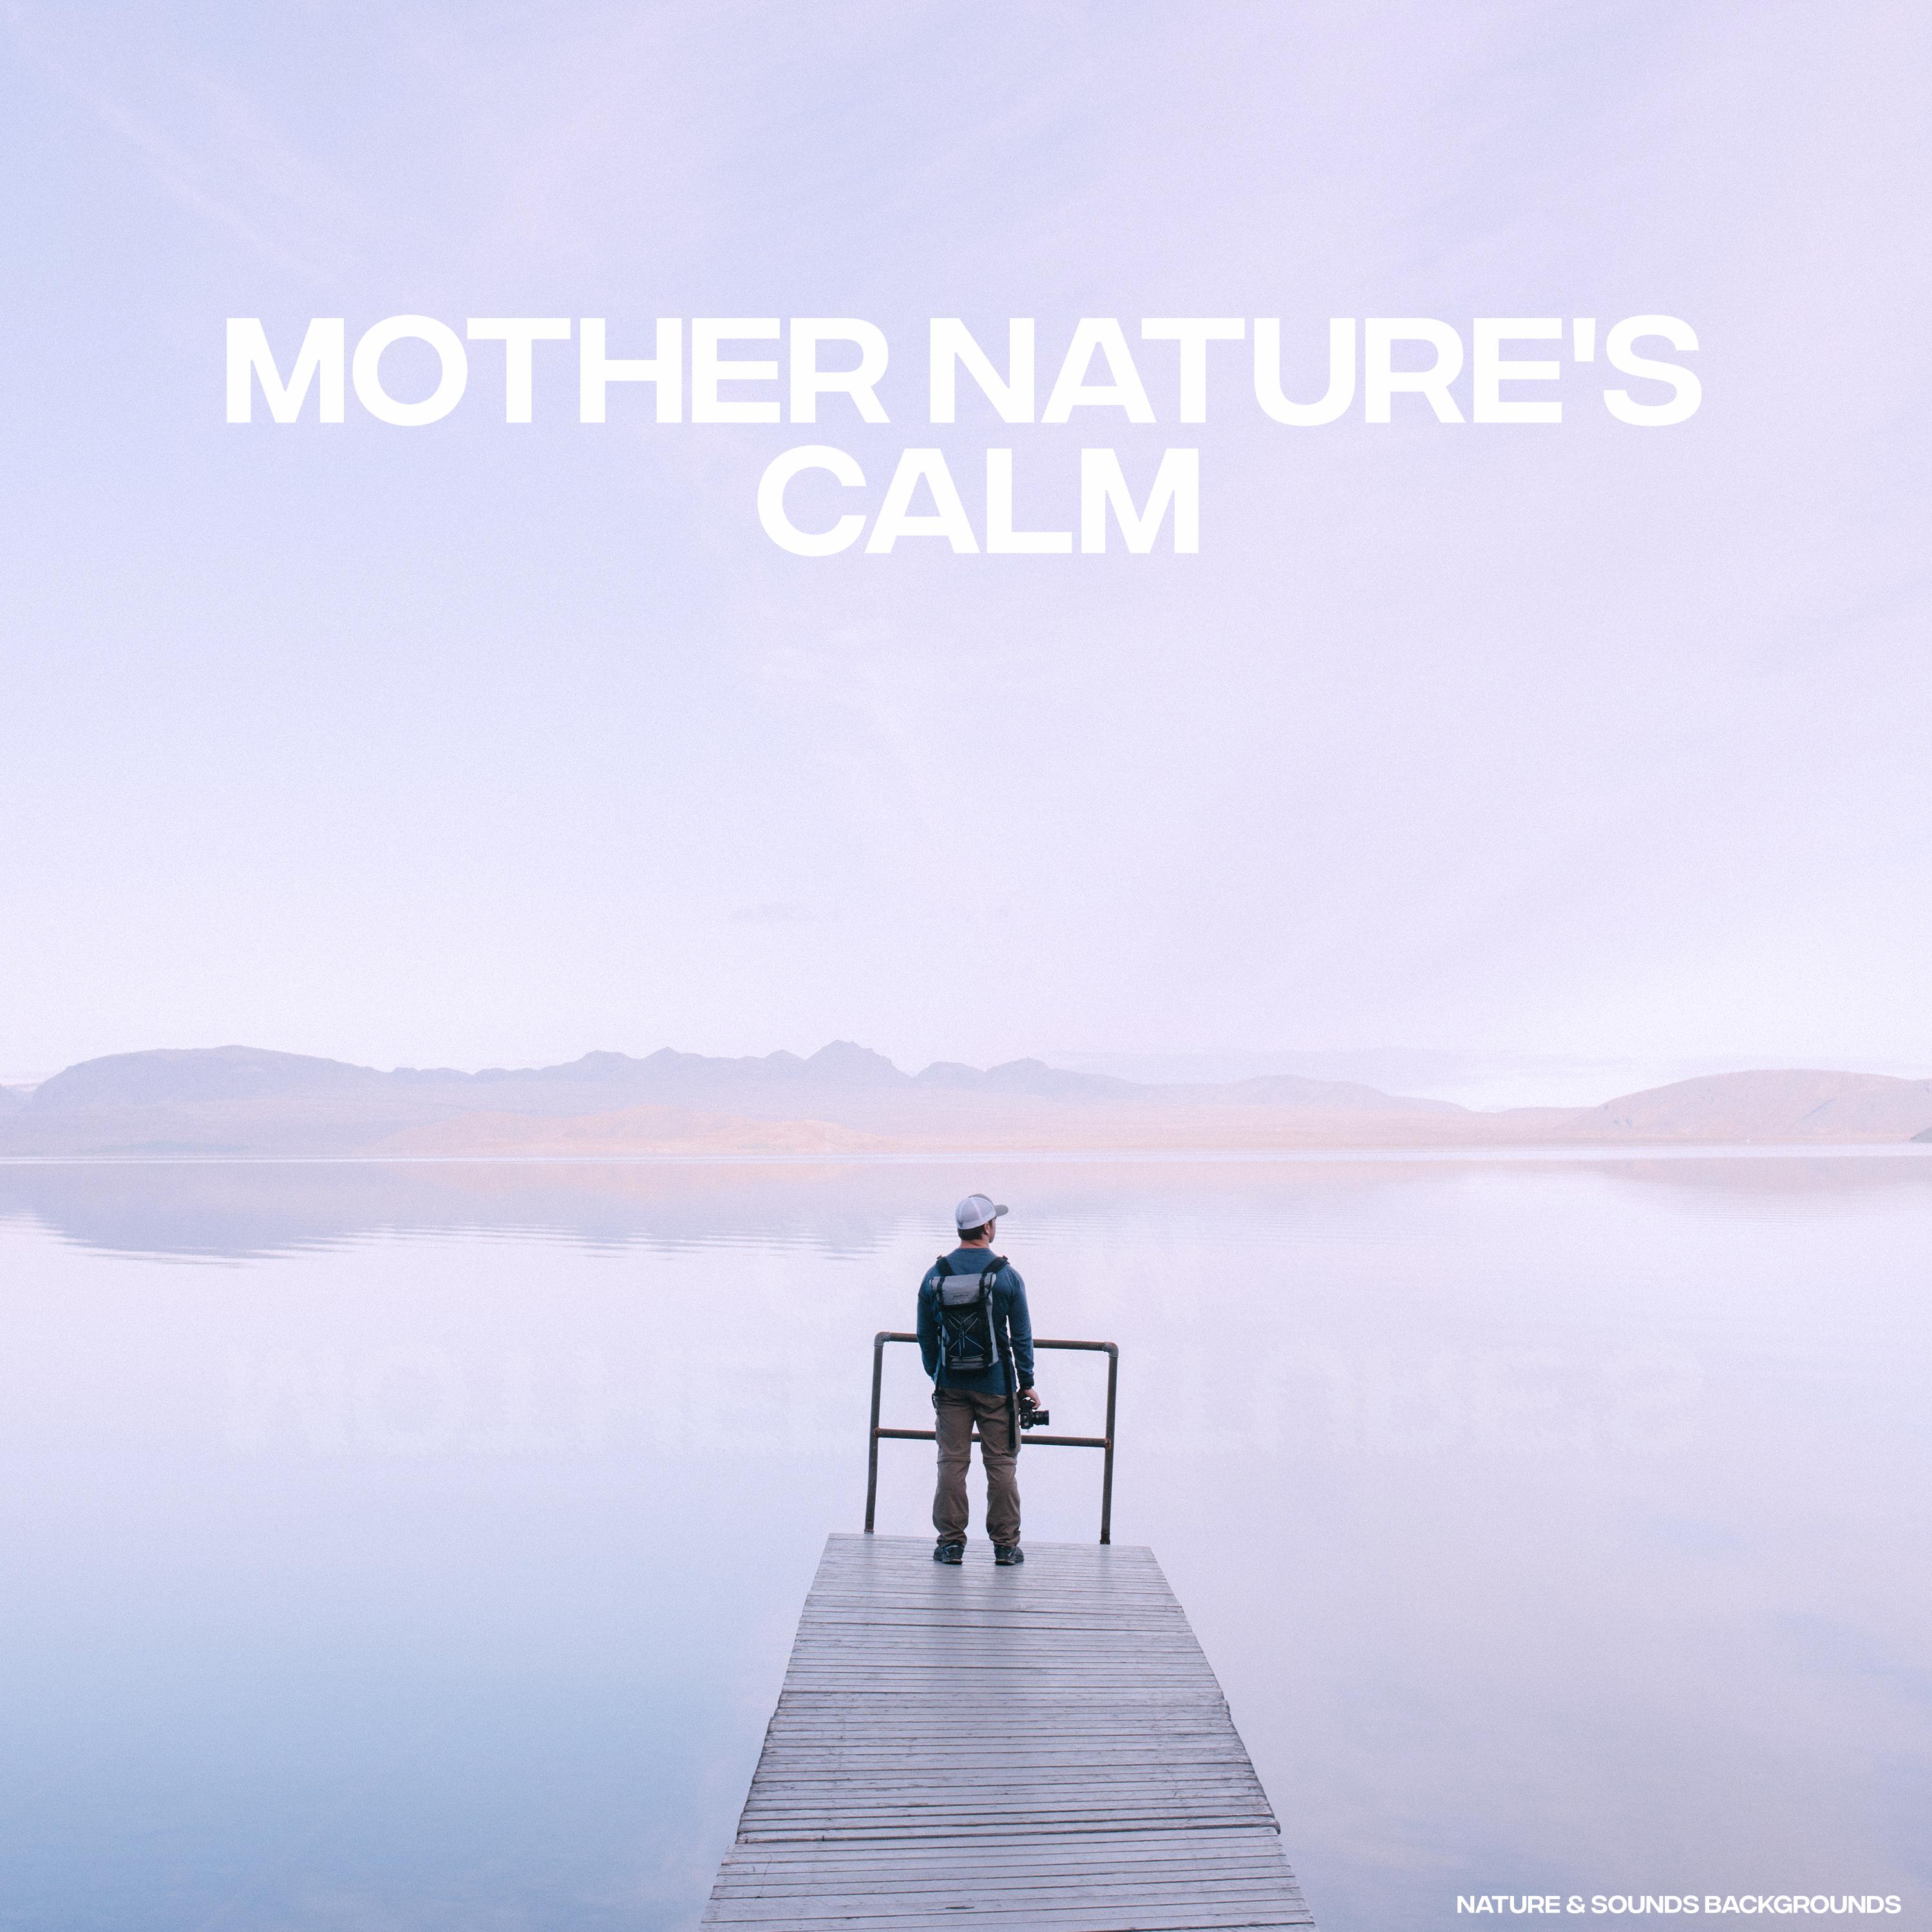 Mother Nature's Calm